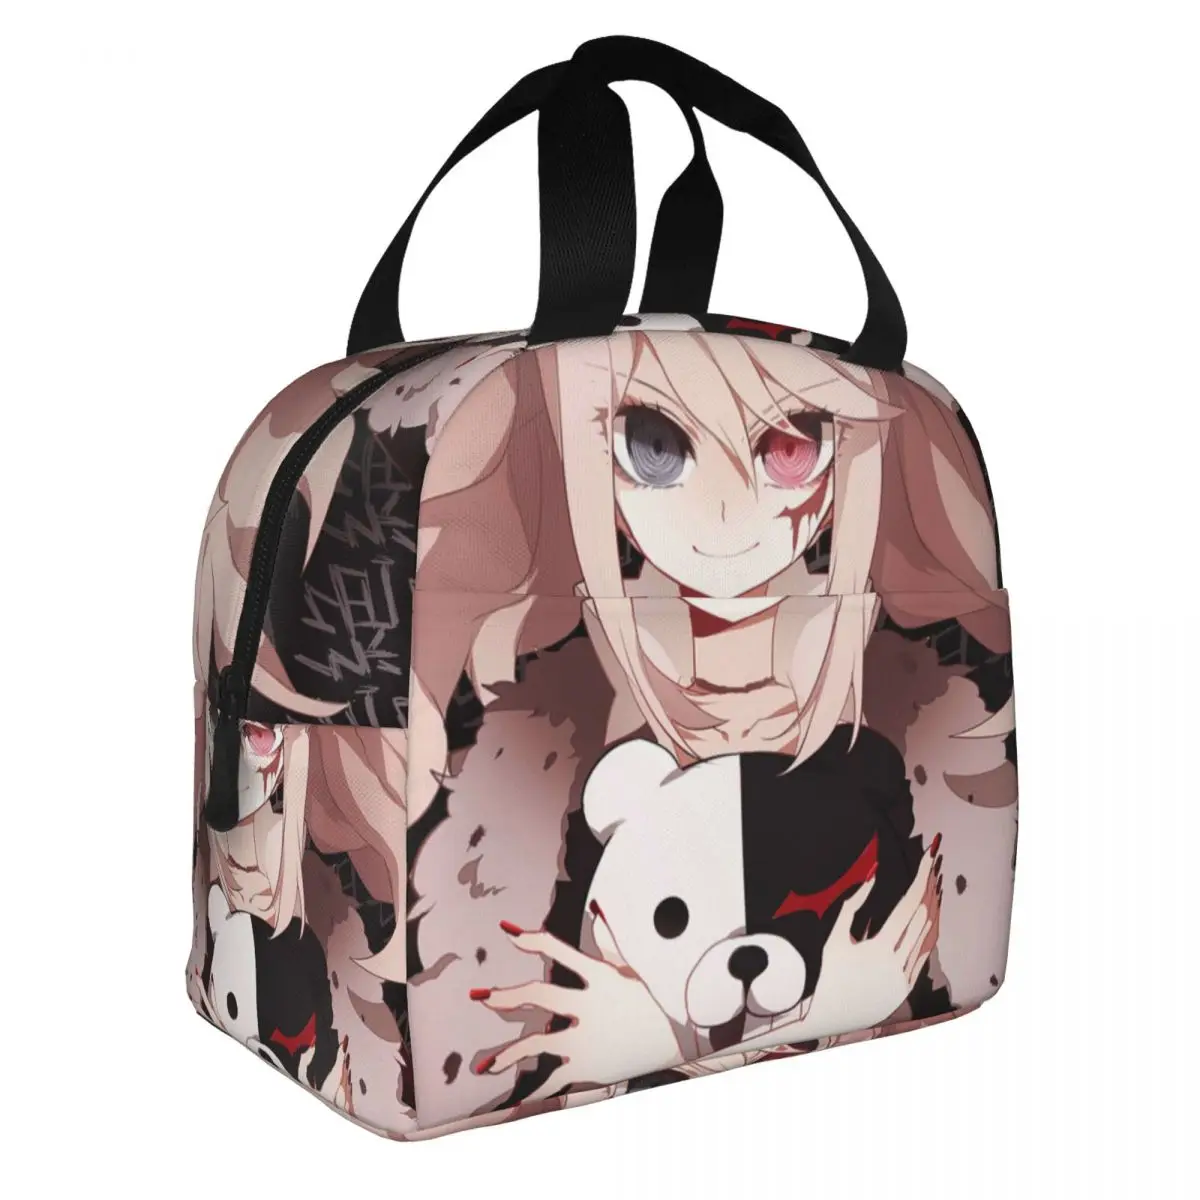 Anime - Danganronpa Lunch Bento Bags Portable Aluminum Foil thickened Thermal Cloth Lunch Bag for Women Men Boy